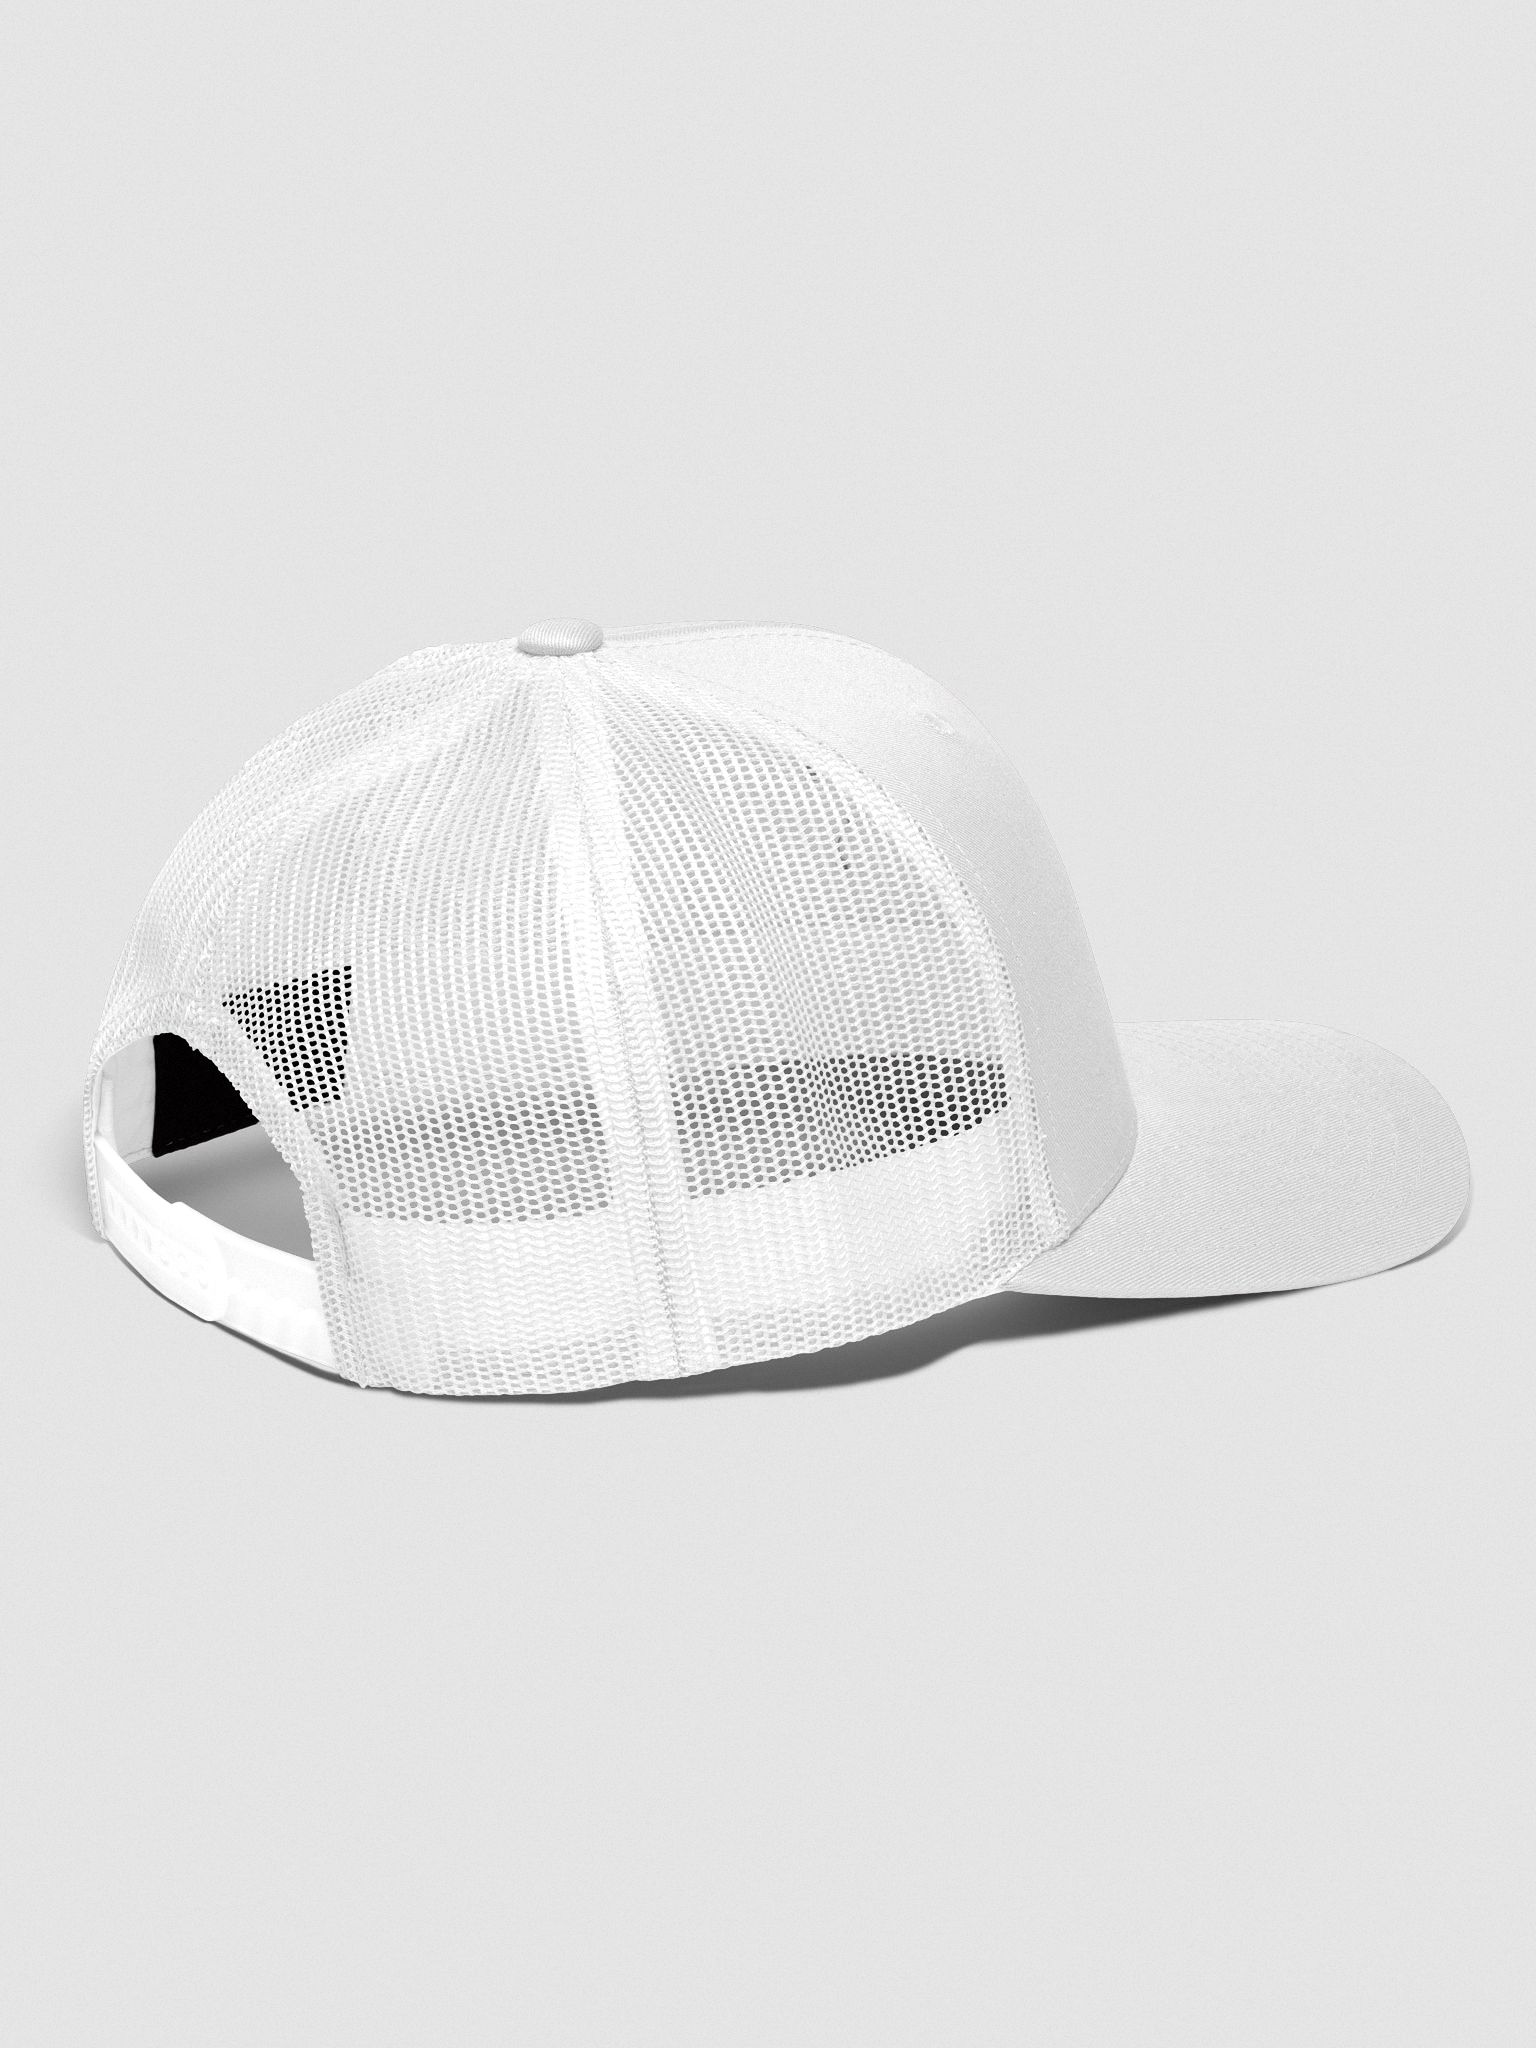 The V-Sports Hat